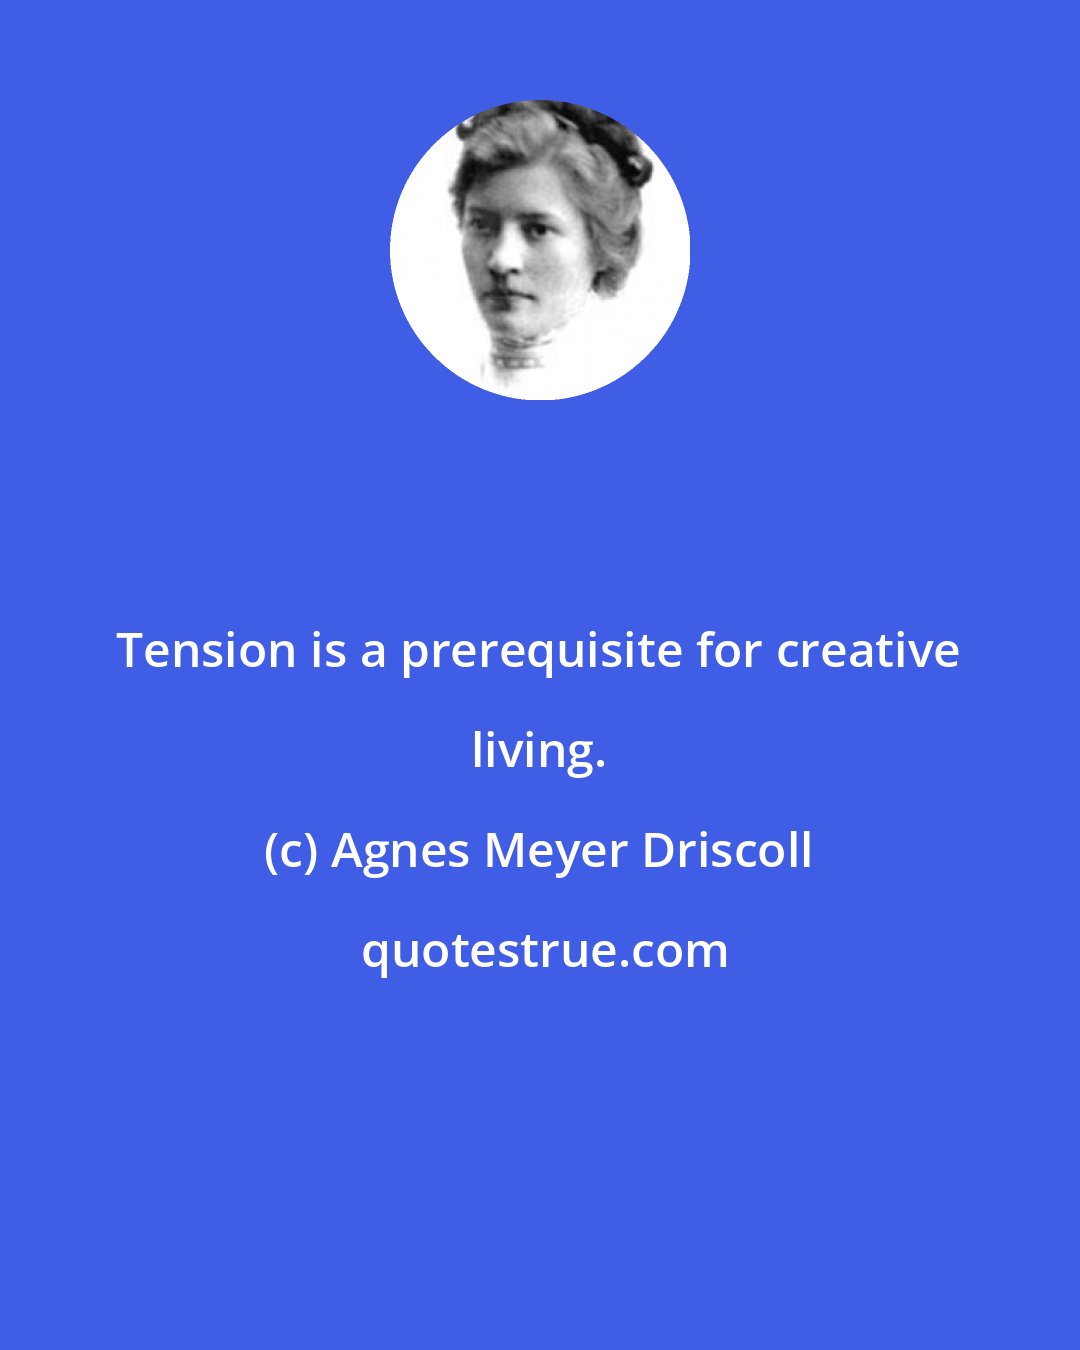 Agnes Meyer Driscoll: Tension is a prerequisite for creative living.